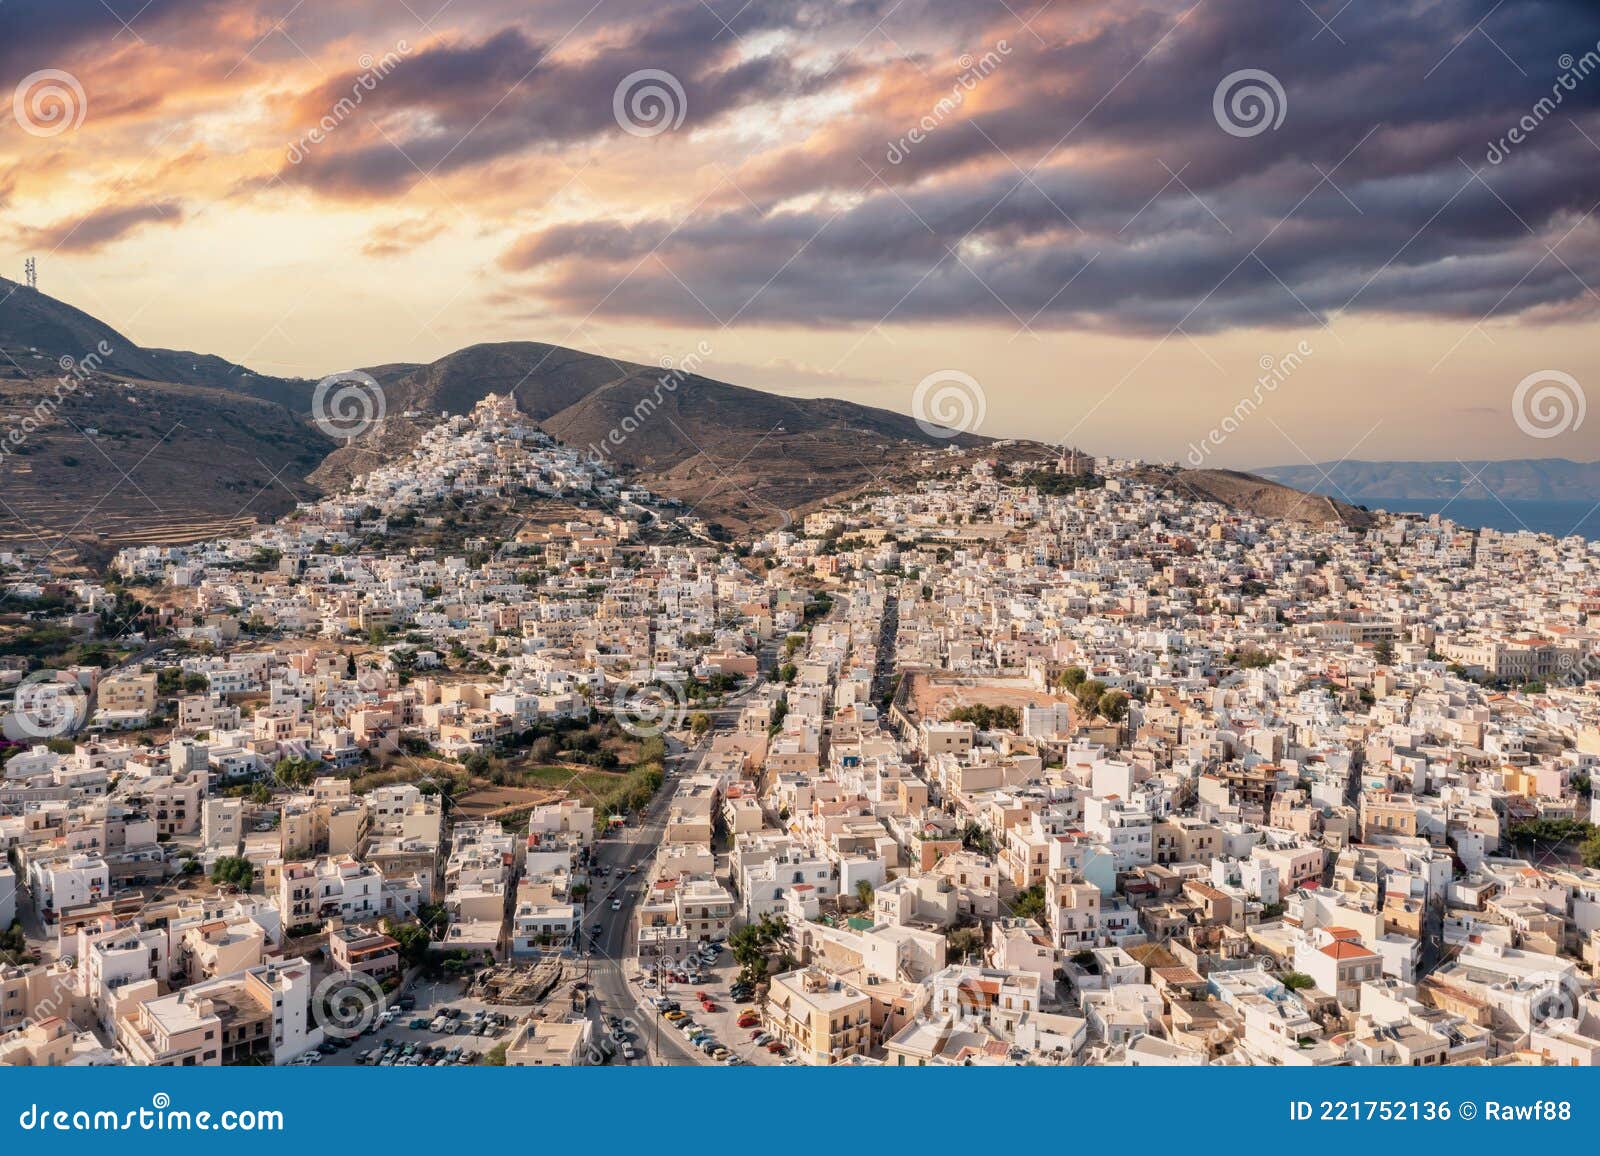 syros island, greece, aerial drone view. ermoupolis and ano siros town cityscape, cloudy sky at sunset